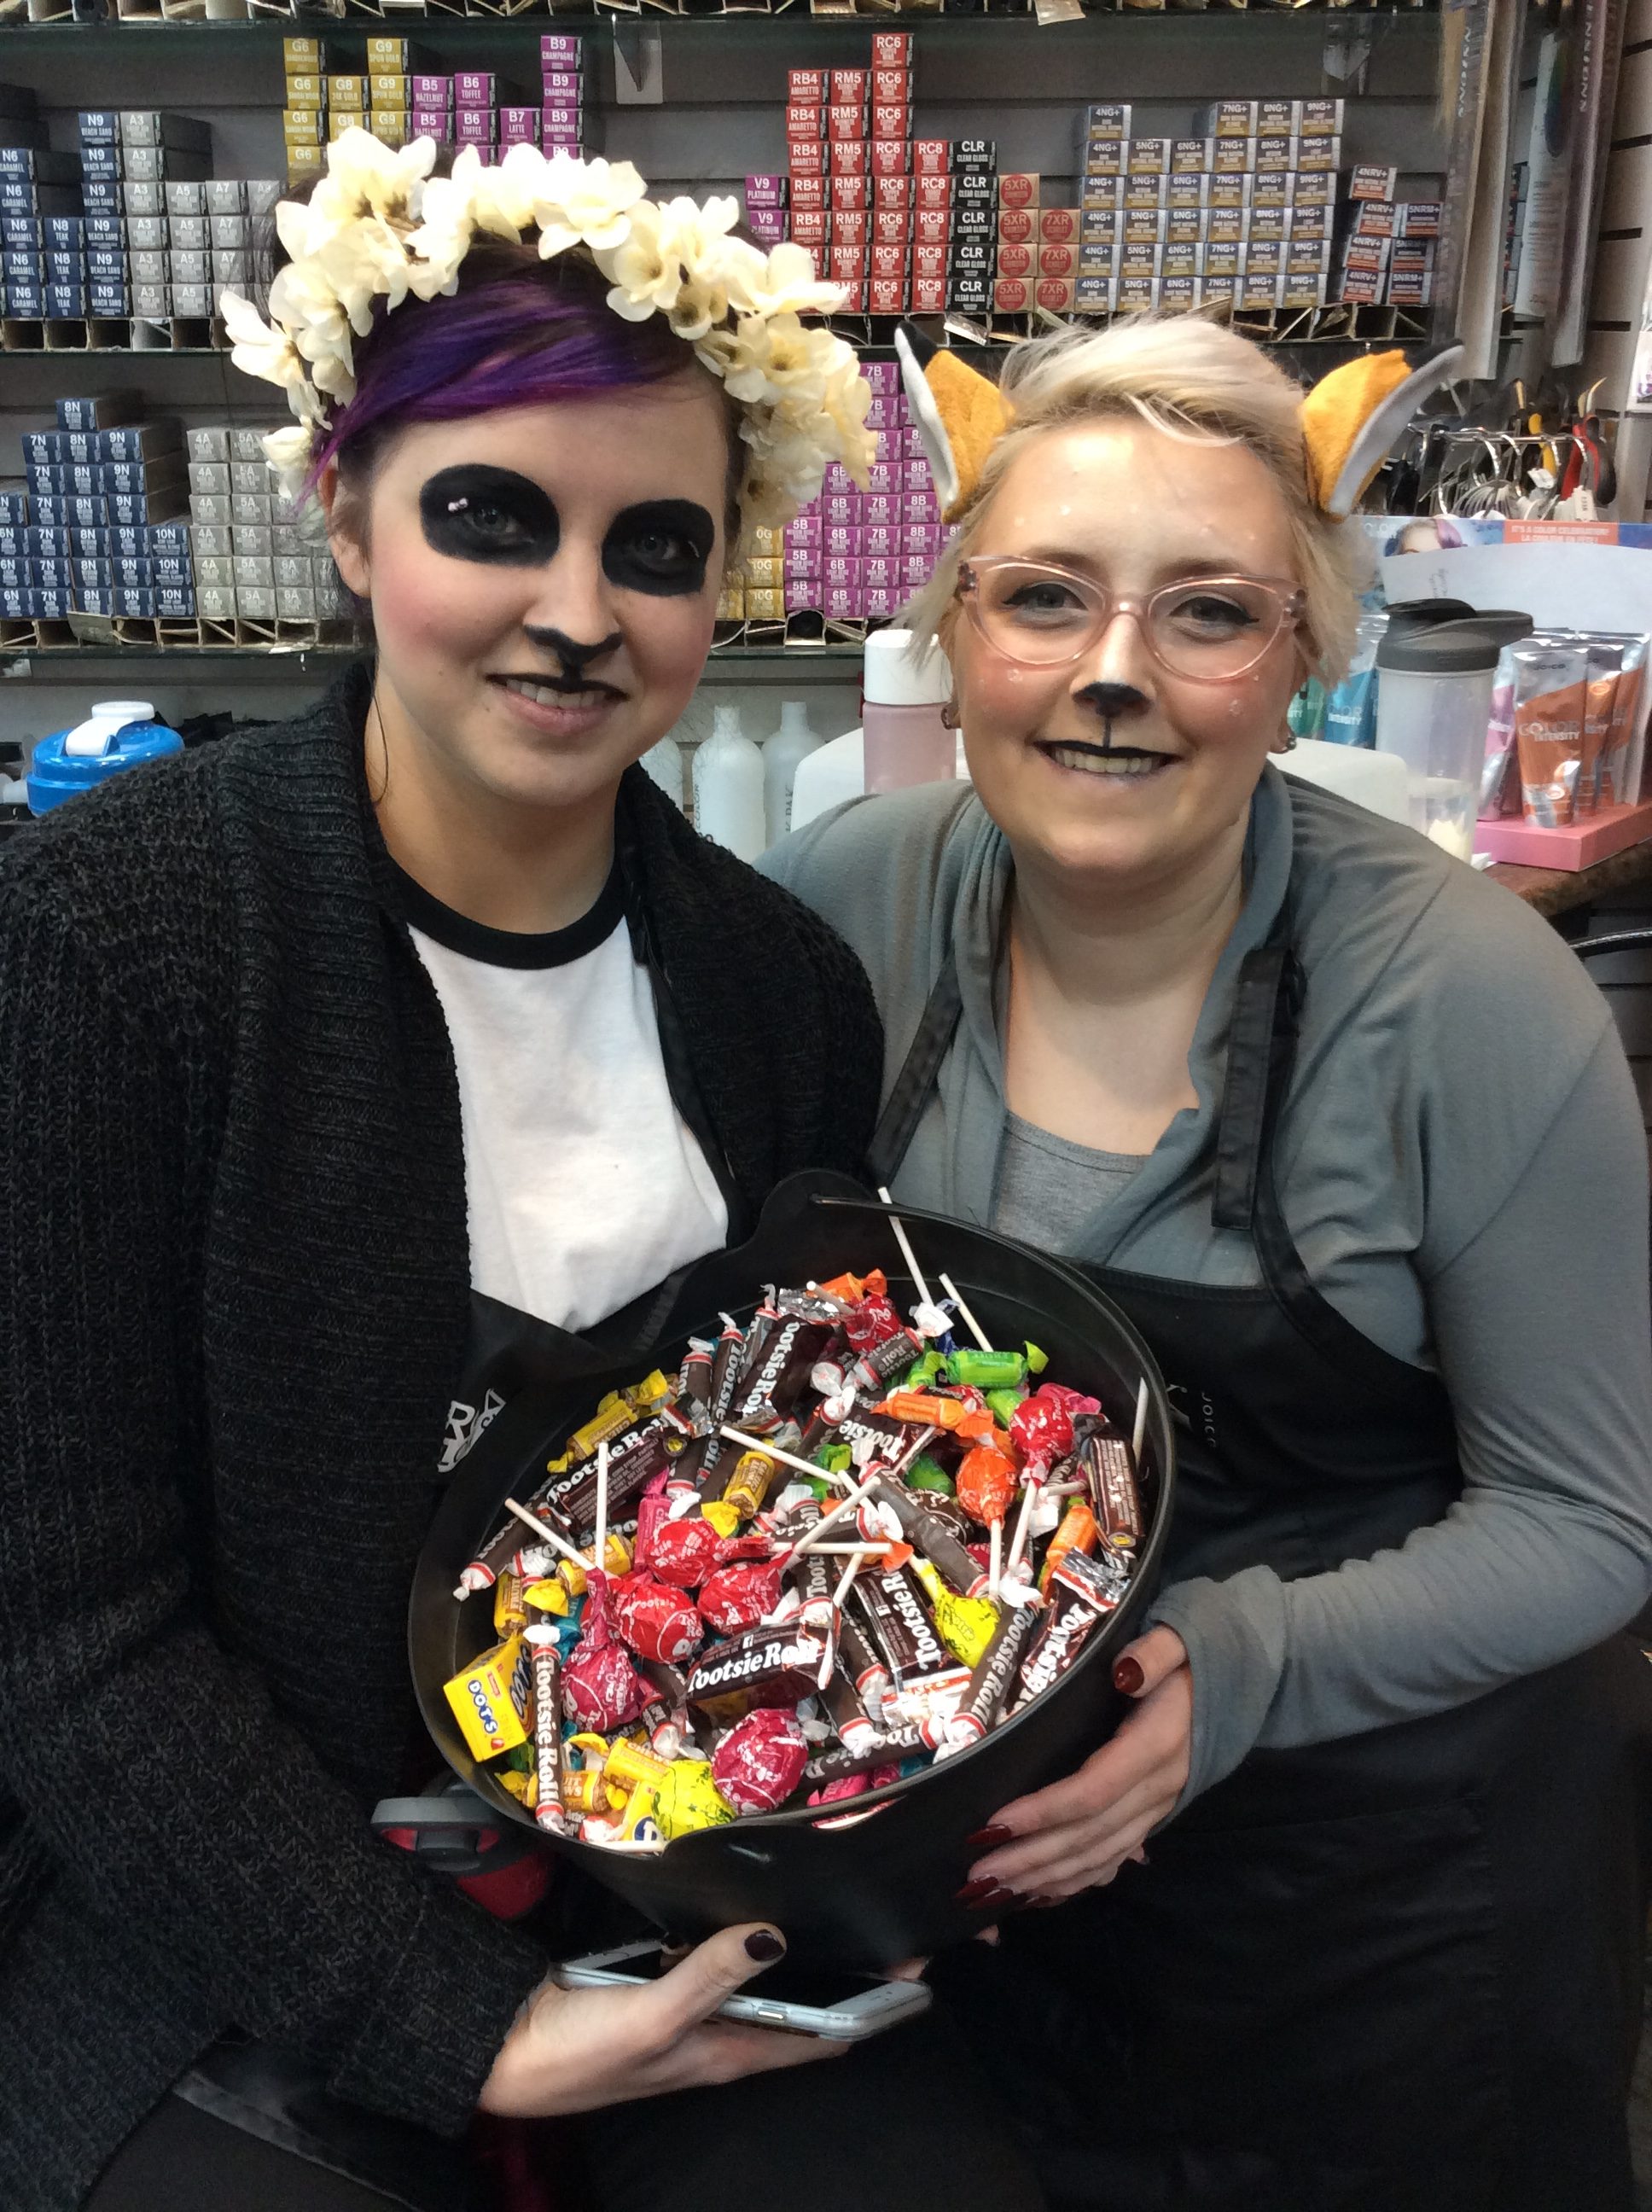 Hairstyle inn stylists in Halloween costumes and a bowl of candies